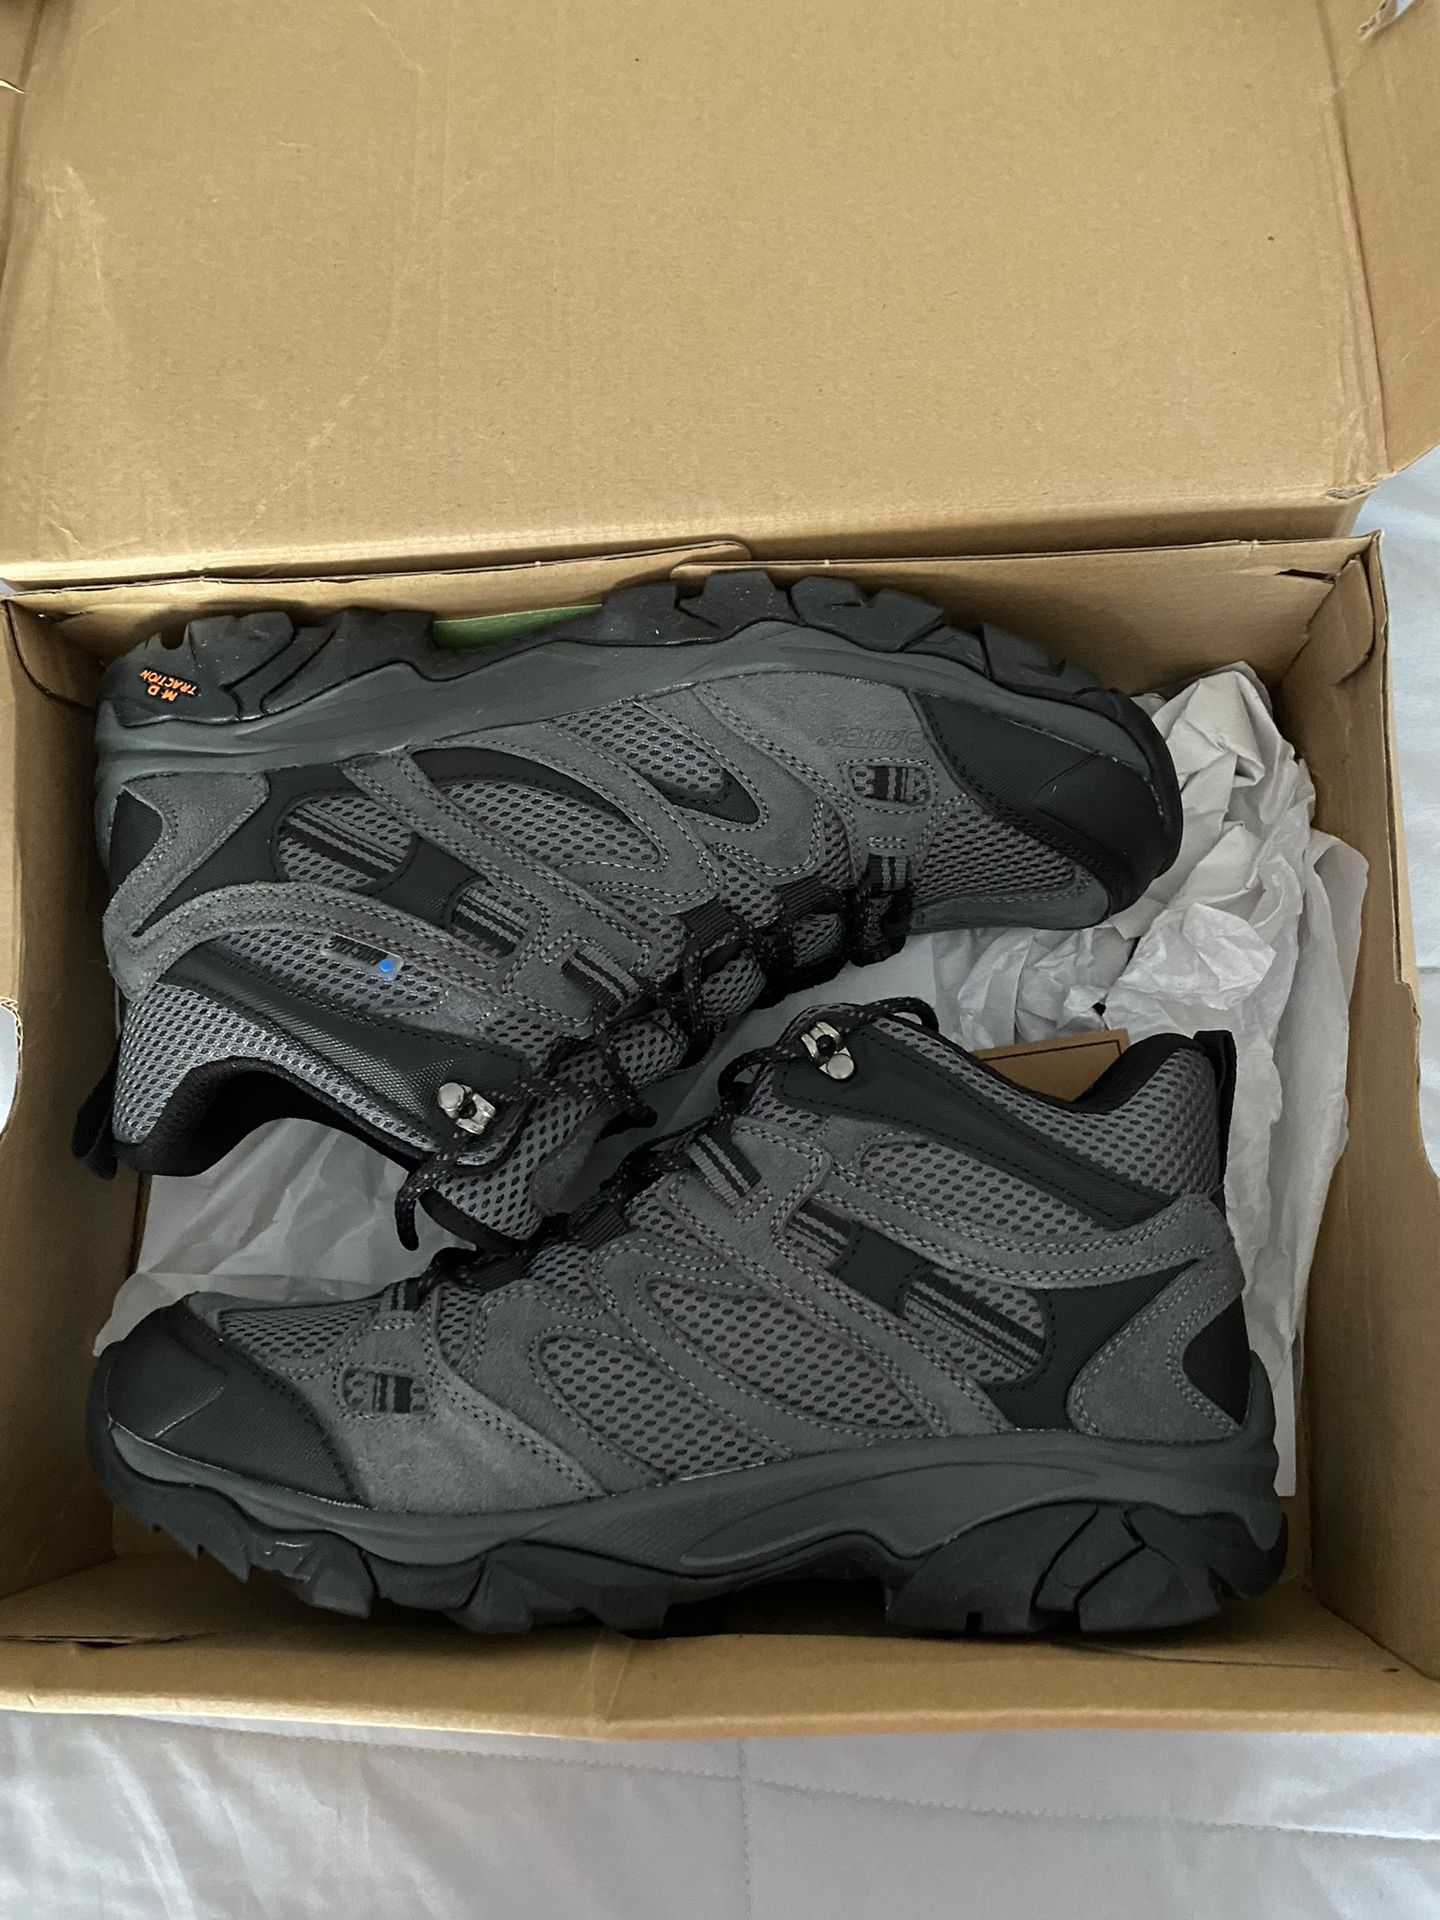 New  comes box and tags  Grey and black boots  Men’s size 10  Water proof 